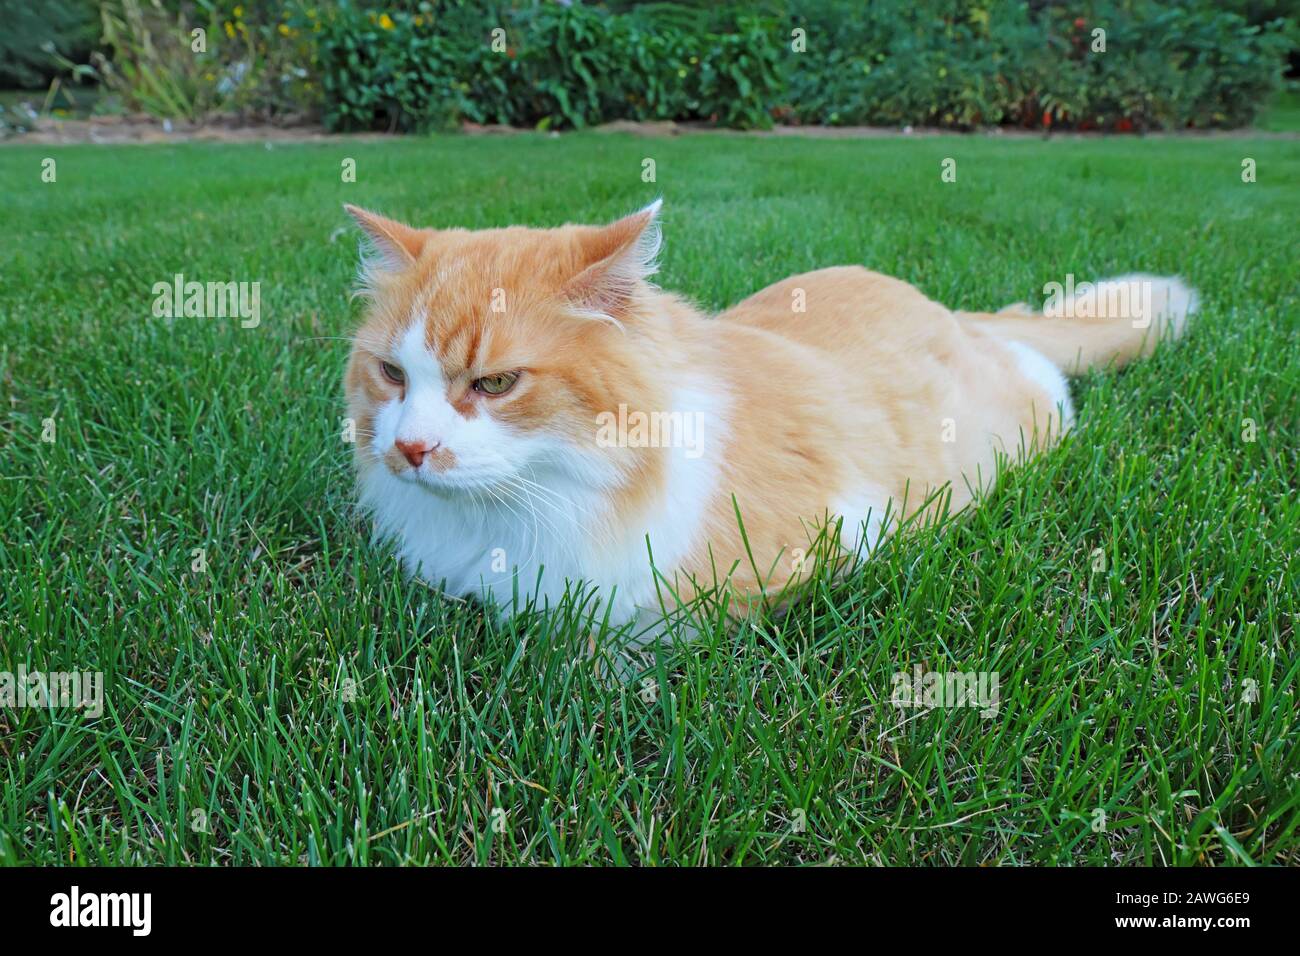 An orange and white domestic longhair cat (Felis catus) relaxing in a lawn of green grass Stock Photo